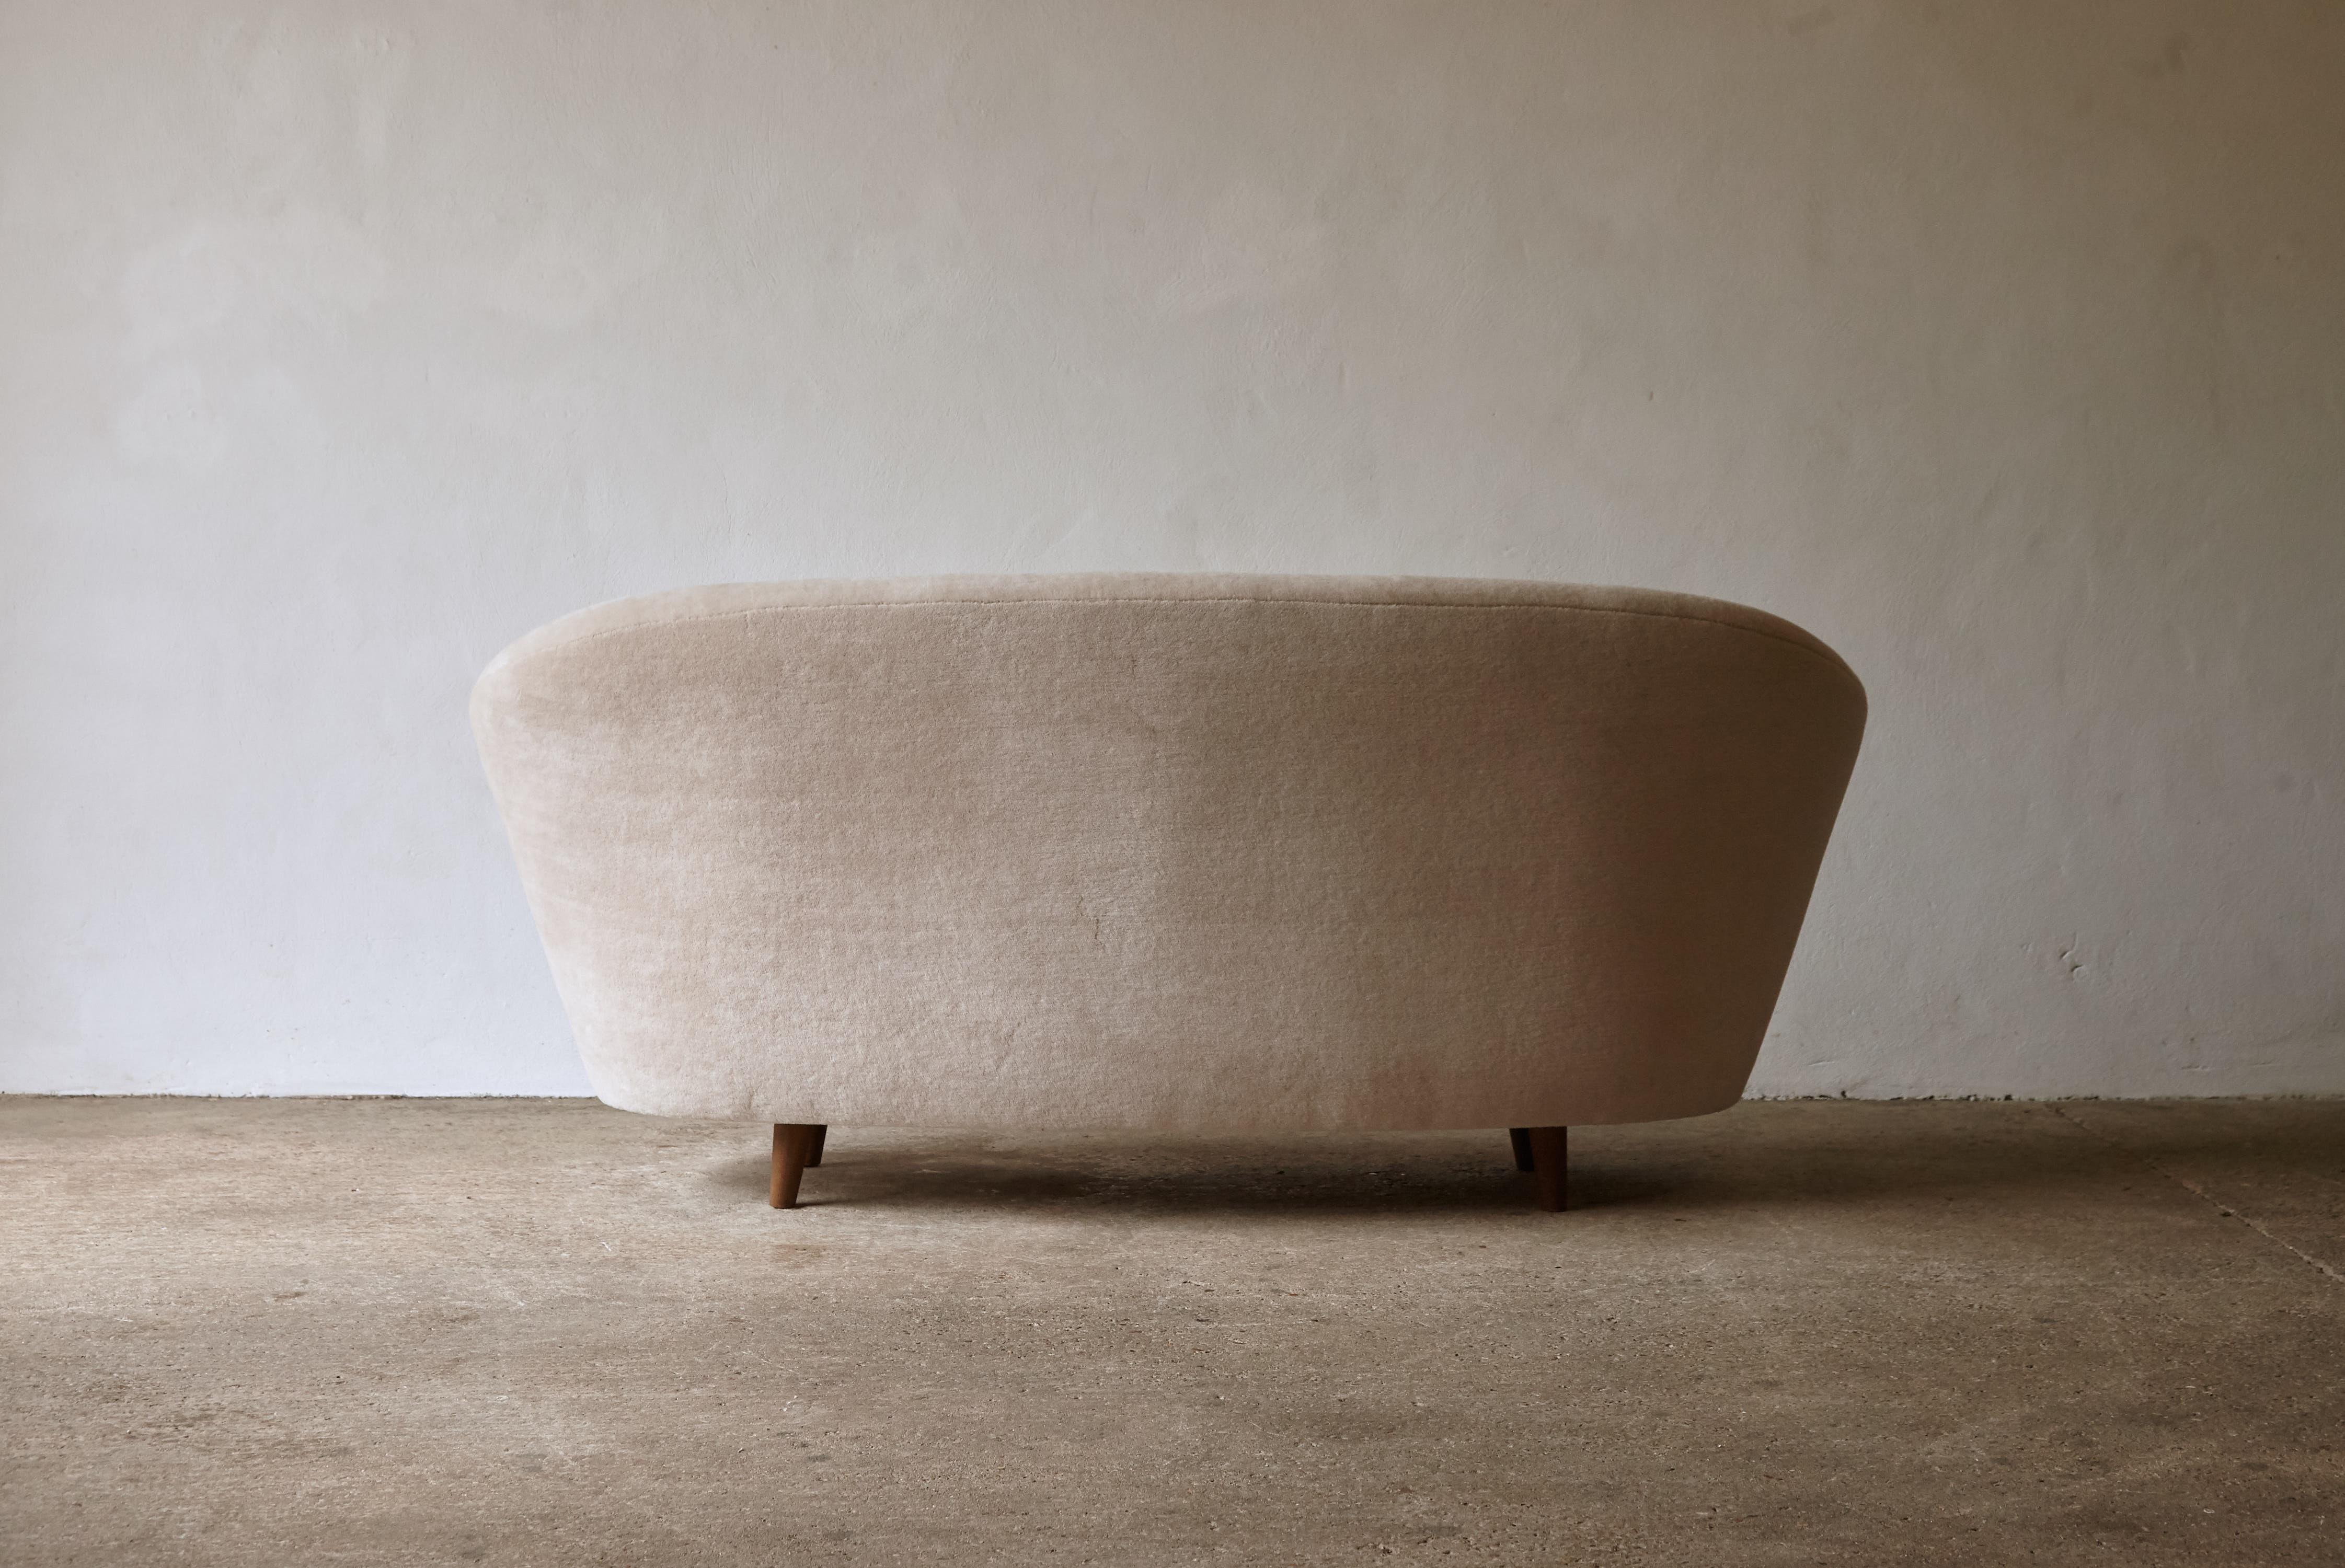 Curved Egg Shape Sofa, in the Style of Ico Parisi, Italy, 1950s / 60s For Sale 1